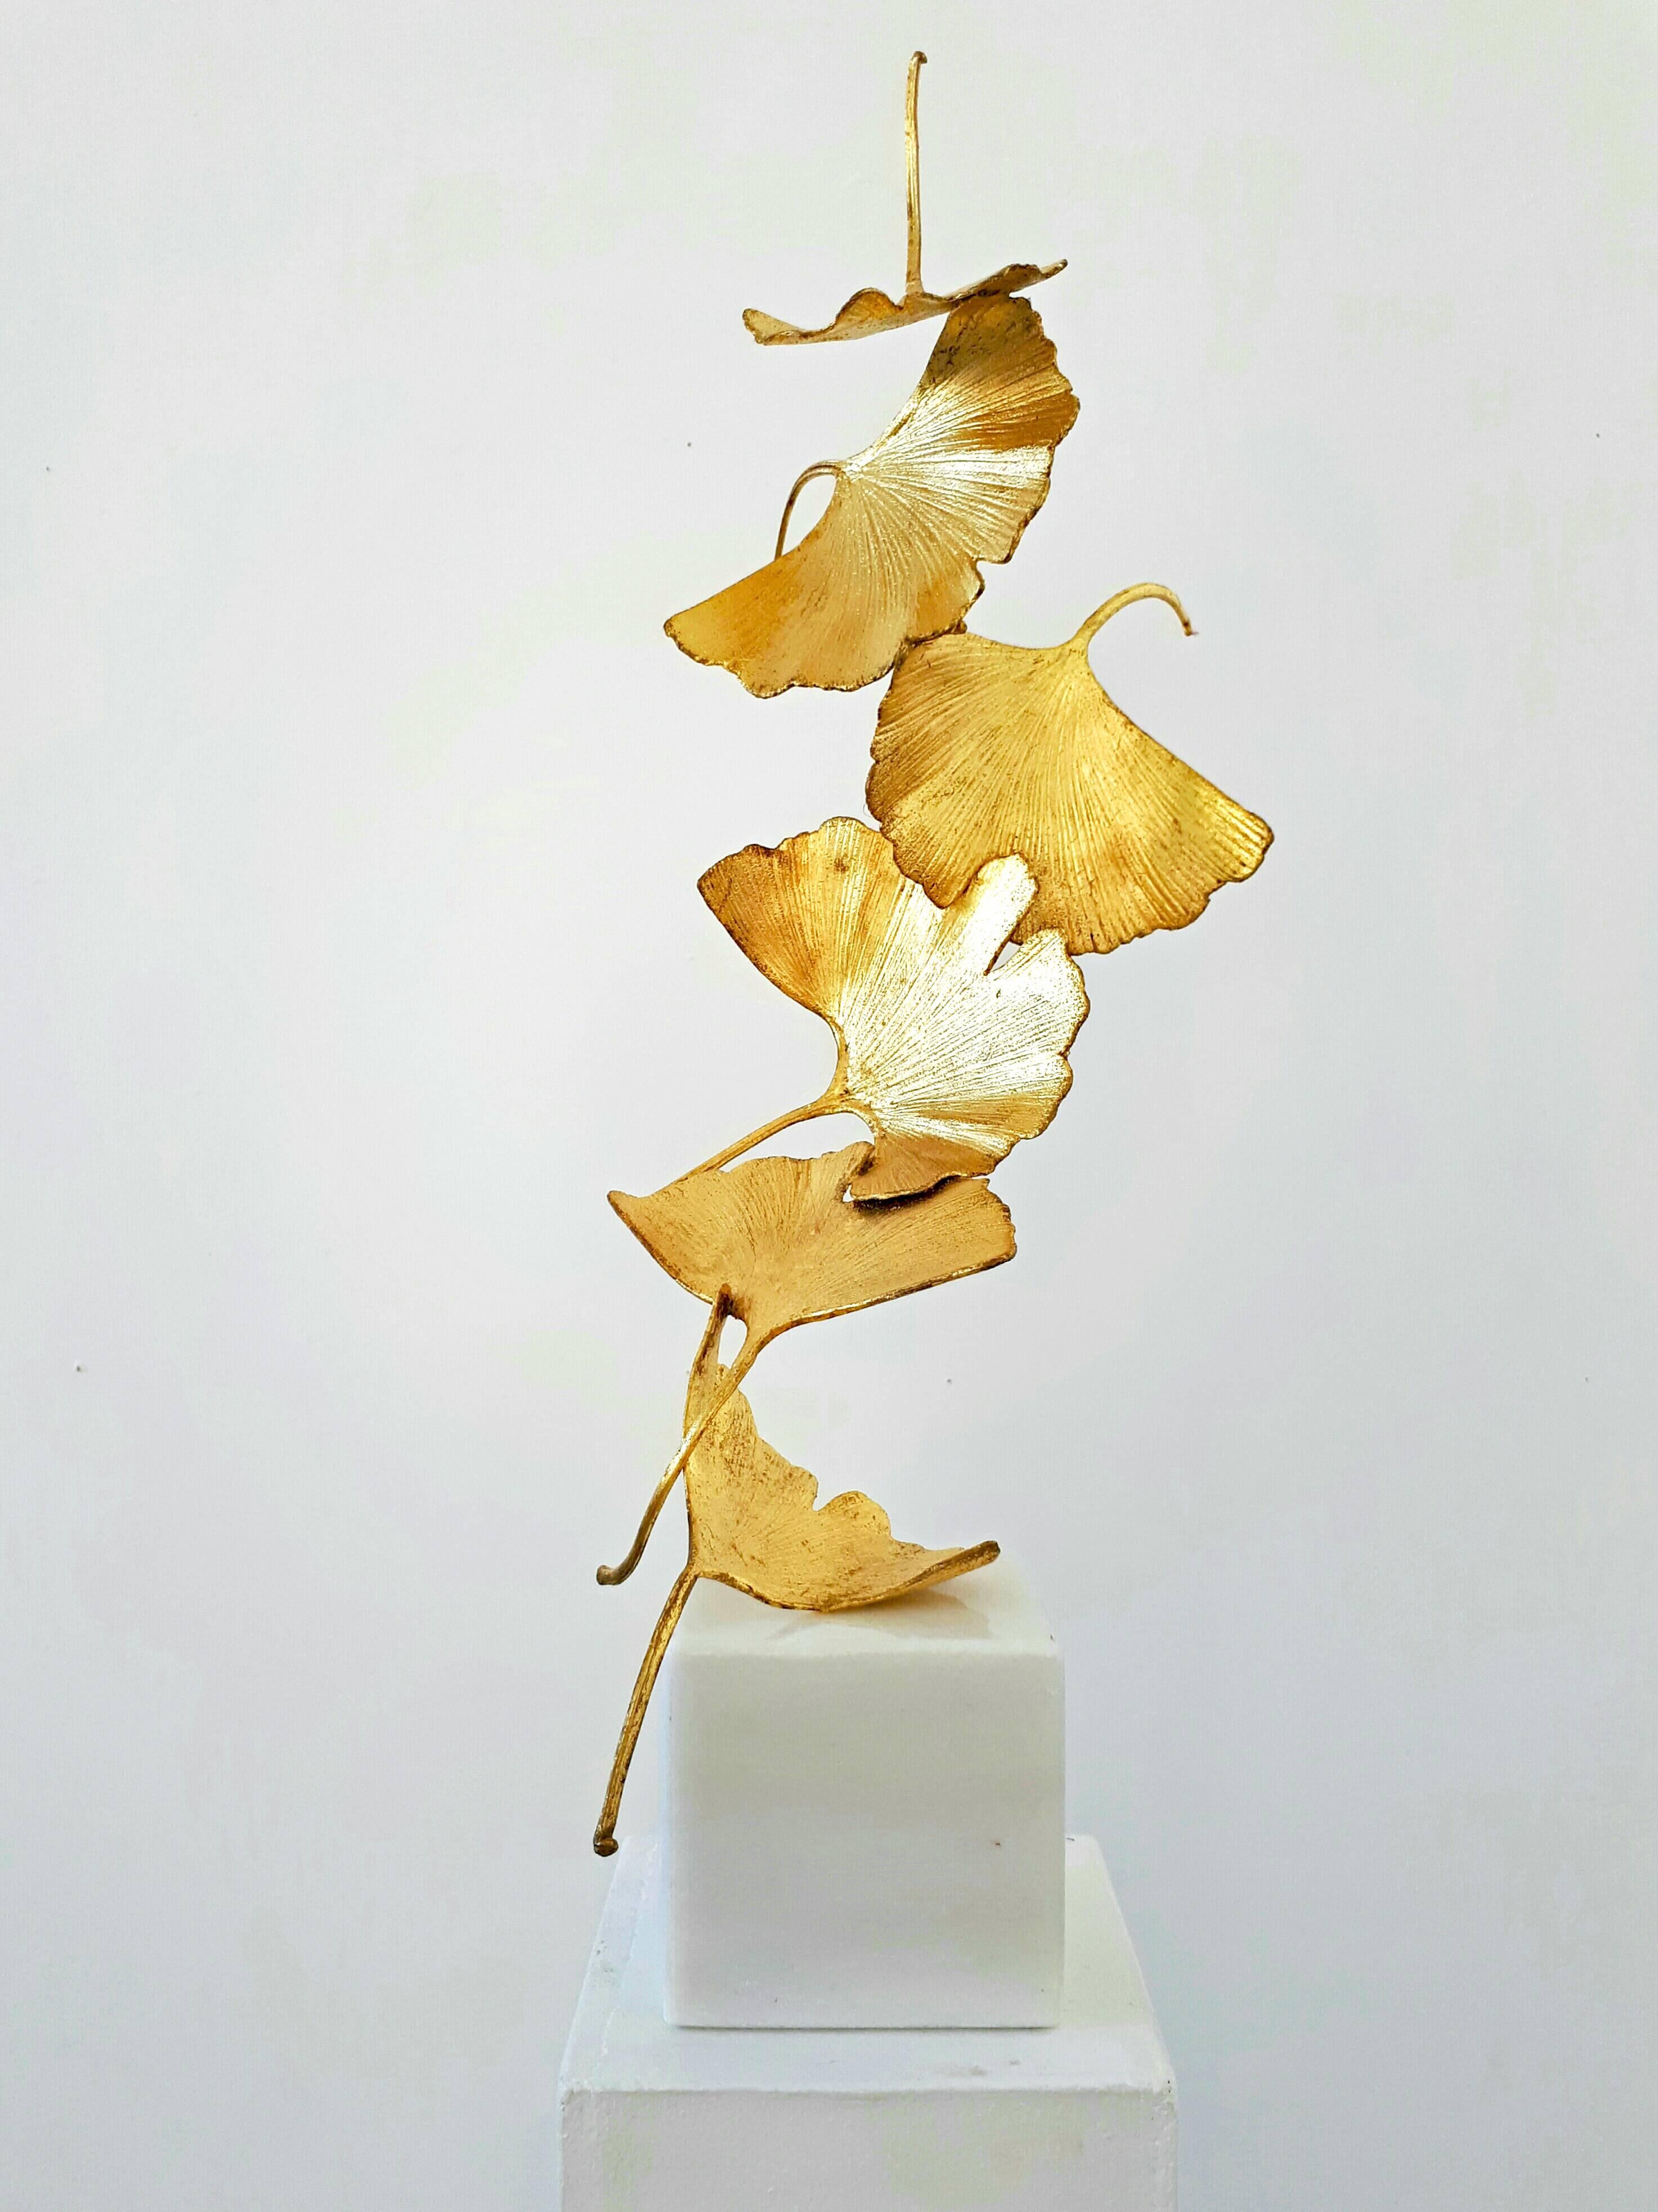 7 Golden Gingko Leaves - Gilded Brass sculpture on white marble base - Sculpture by Kuno Vollet